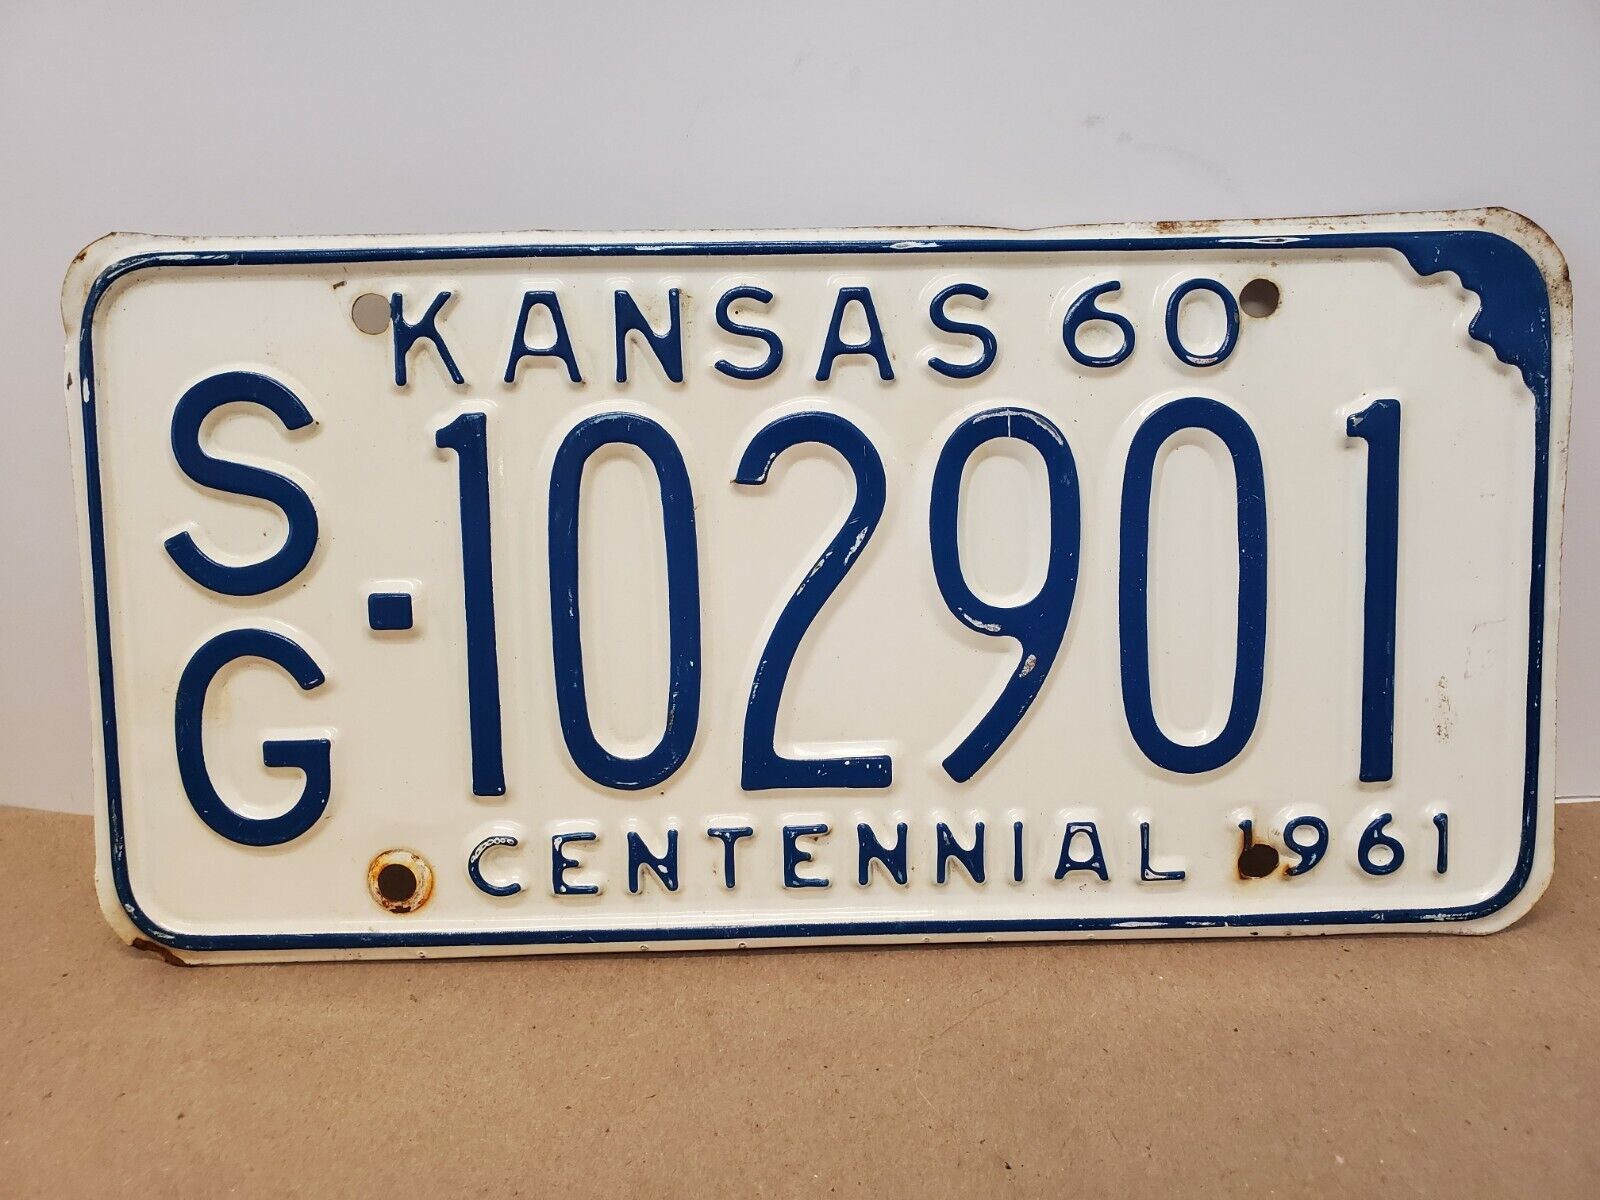 1960 KANSAS State Shape License Plate - SEDGWICK COUNTY SG Nice Condition 